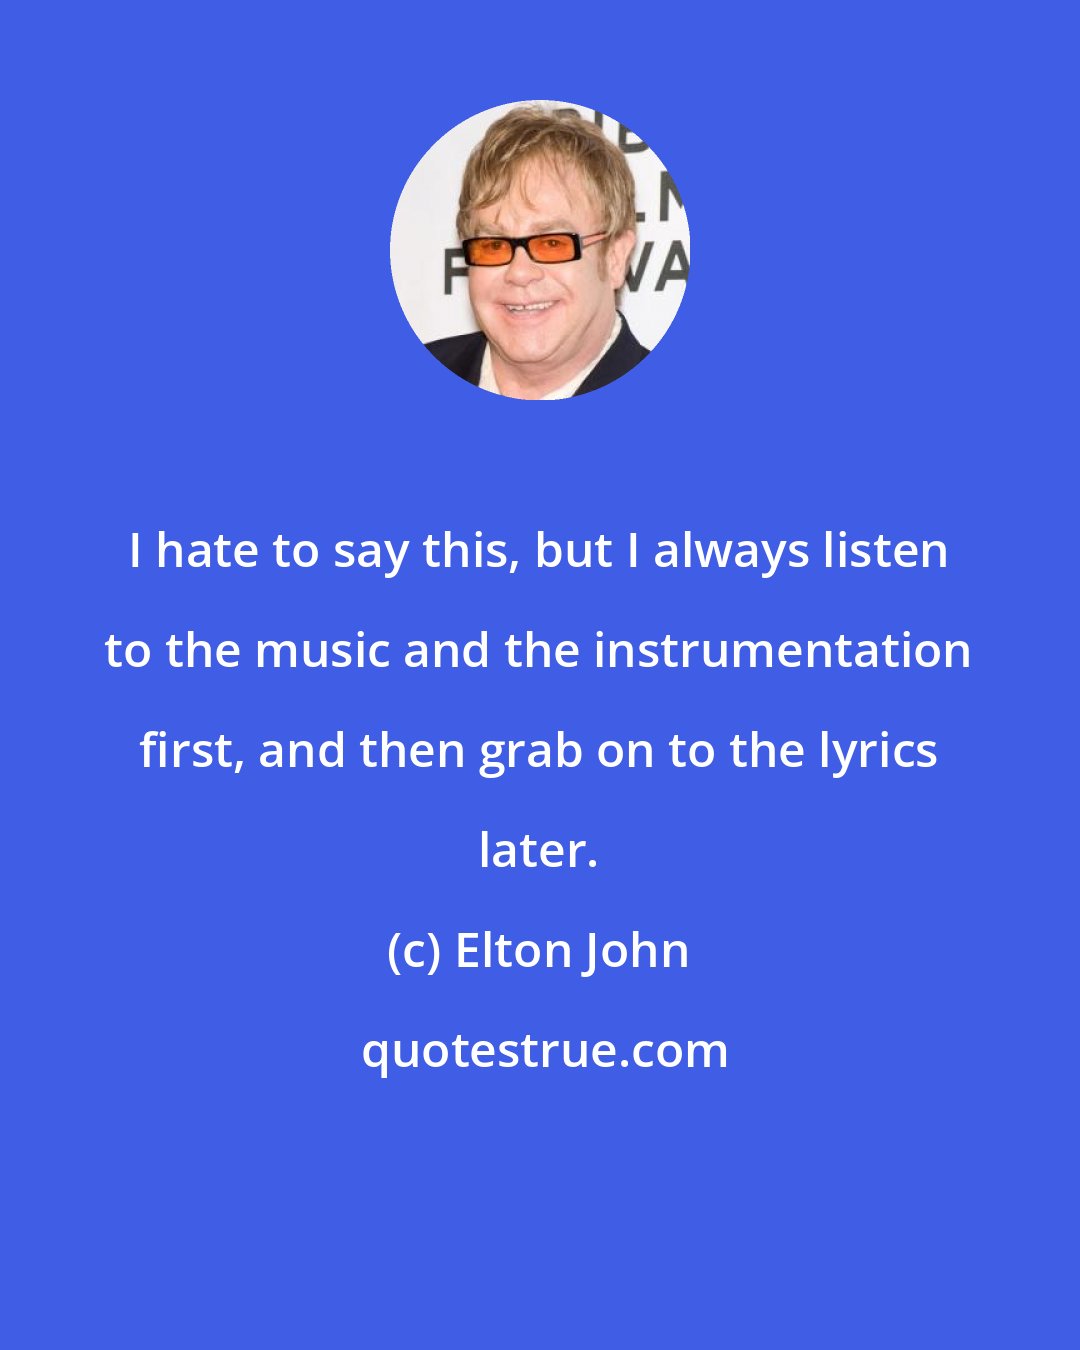 Elton John: I hate to say this, but I always listen to the music and the instrumentation first, and then grab on to the lyrics later.